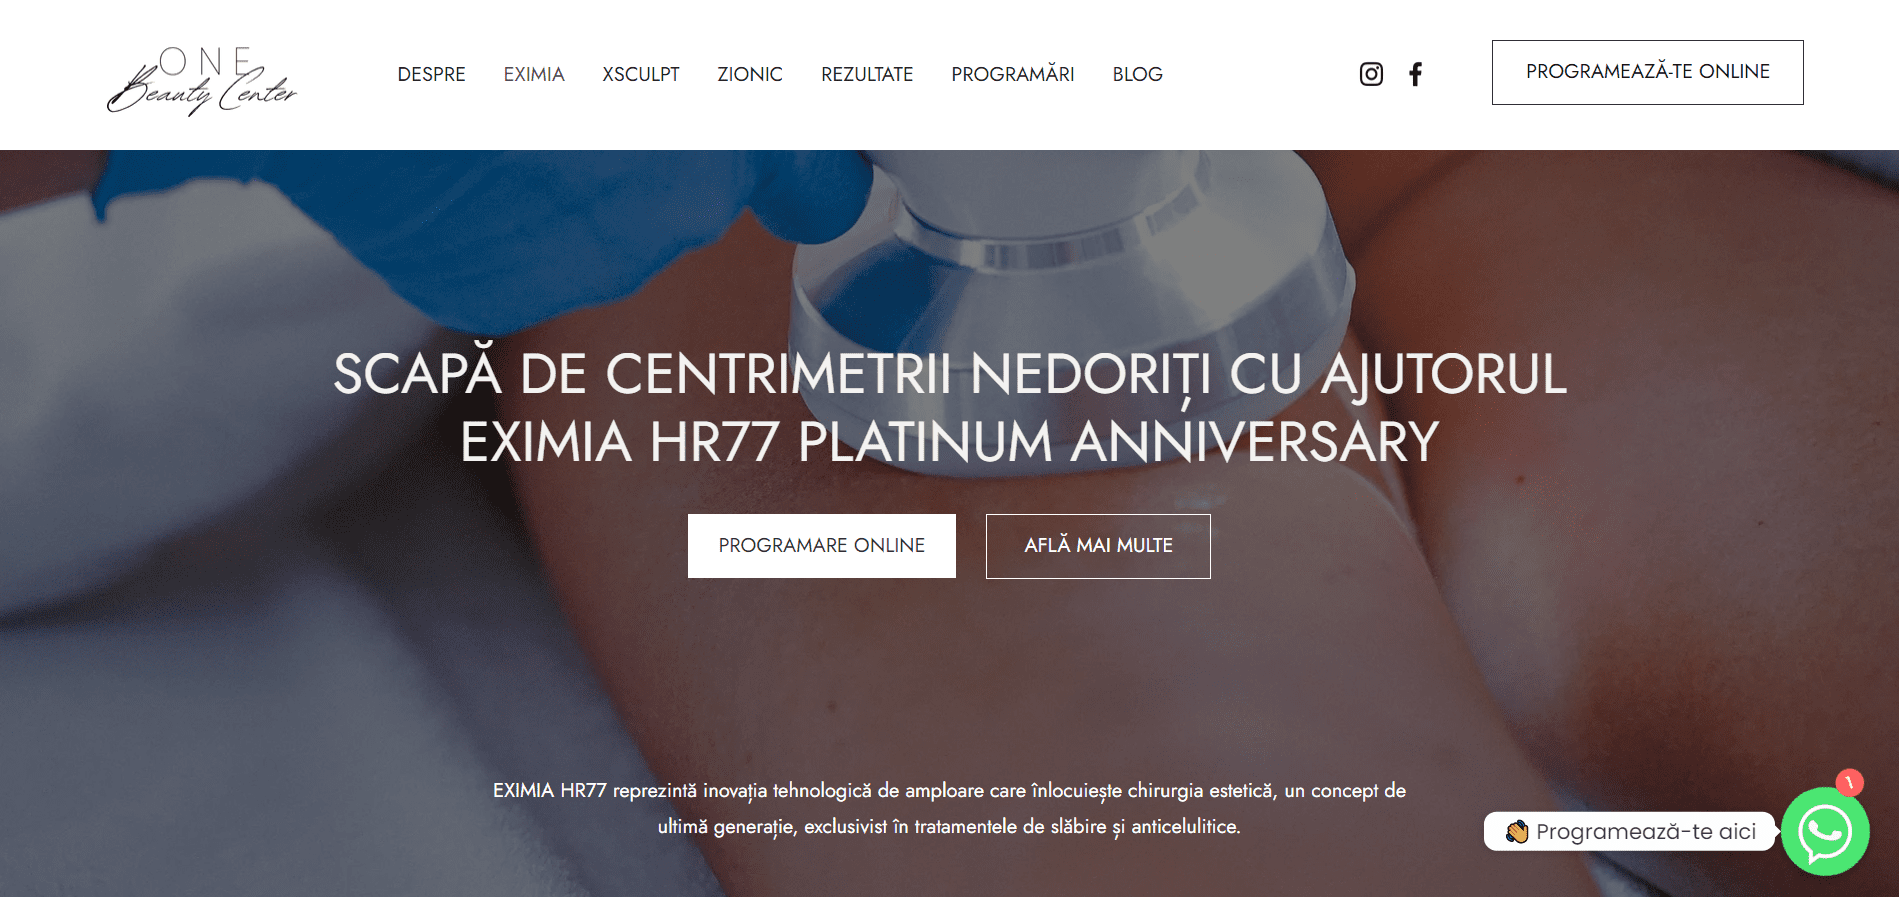 Website One Beauty Center - Smart Growth Marketing Agency - Complete Smart Marketing Services: Branding, Web Design, Graphic Design, Soft & Custom App Dev, Strategy, Email & SMS Marketing, Content Marketing, Paid Media, Market Opportunities, Accelerated Growth Cluj Napoca, Baia Mare, Romania.